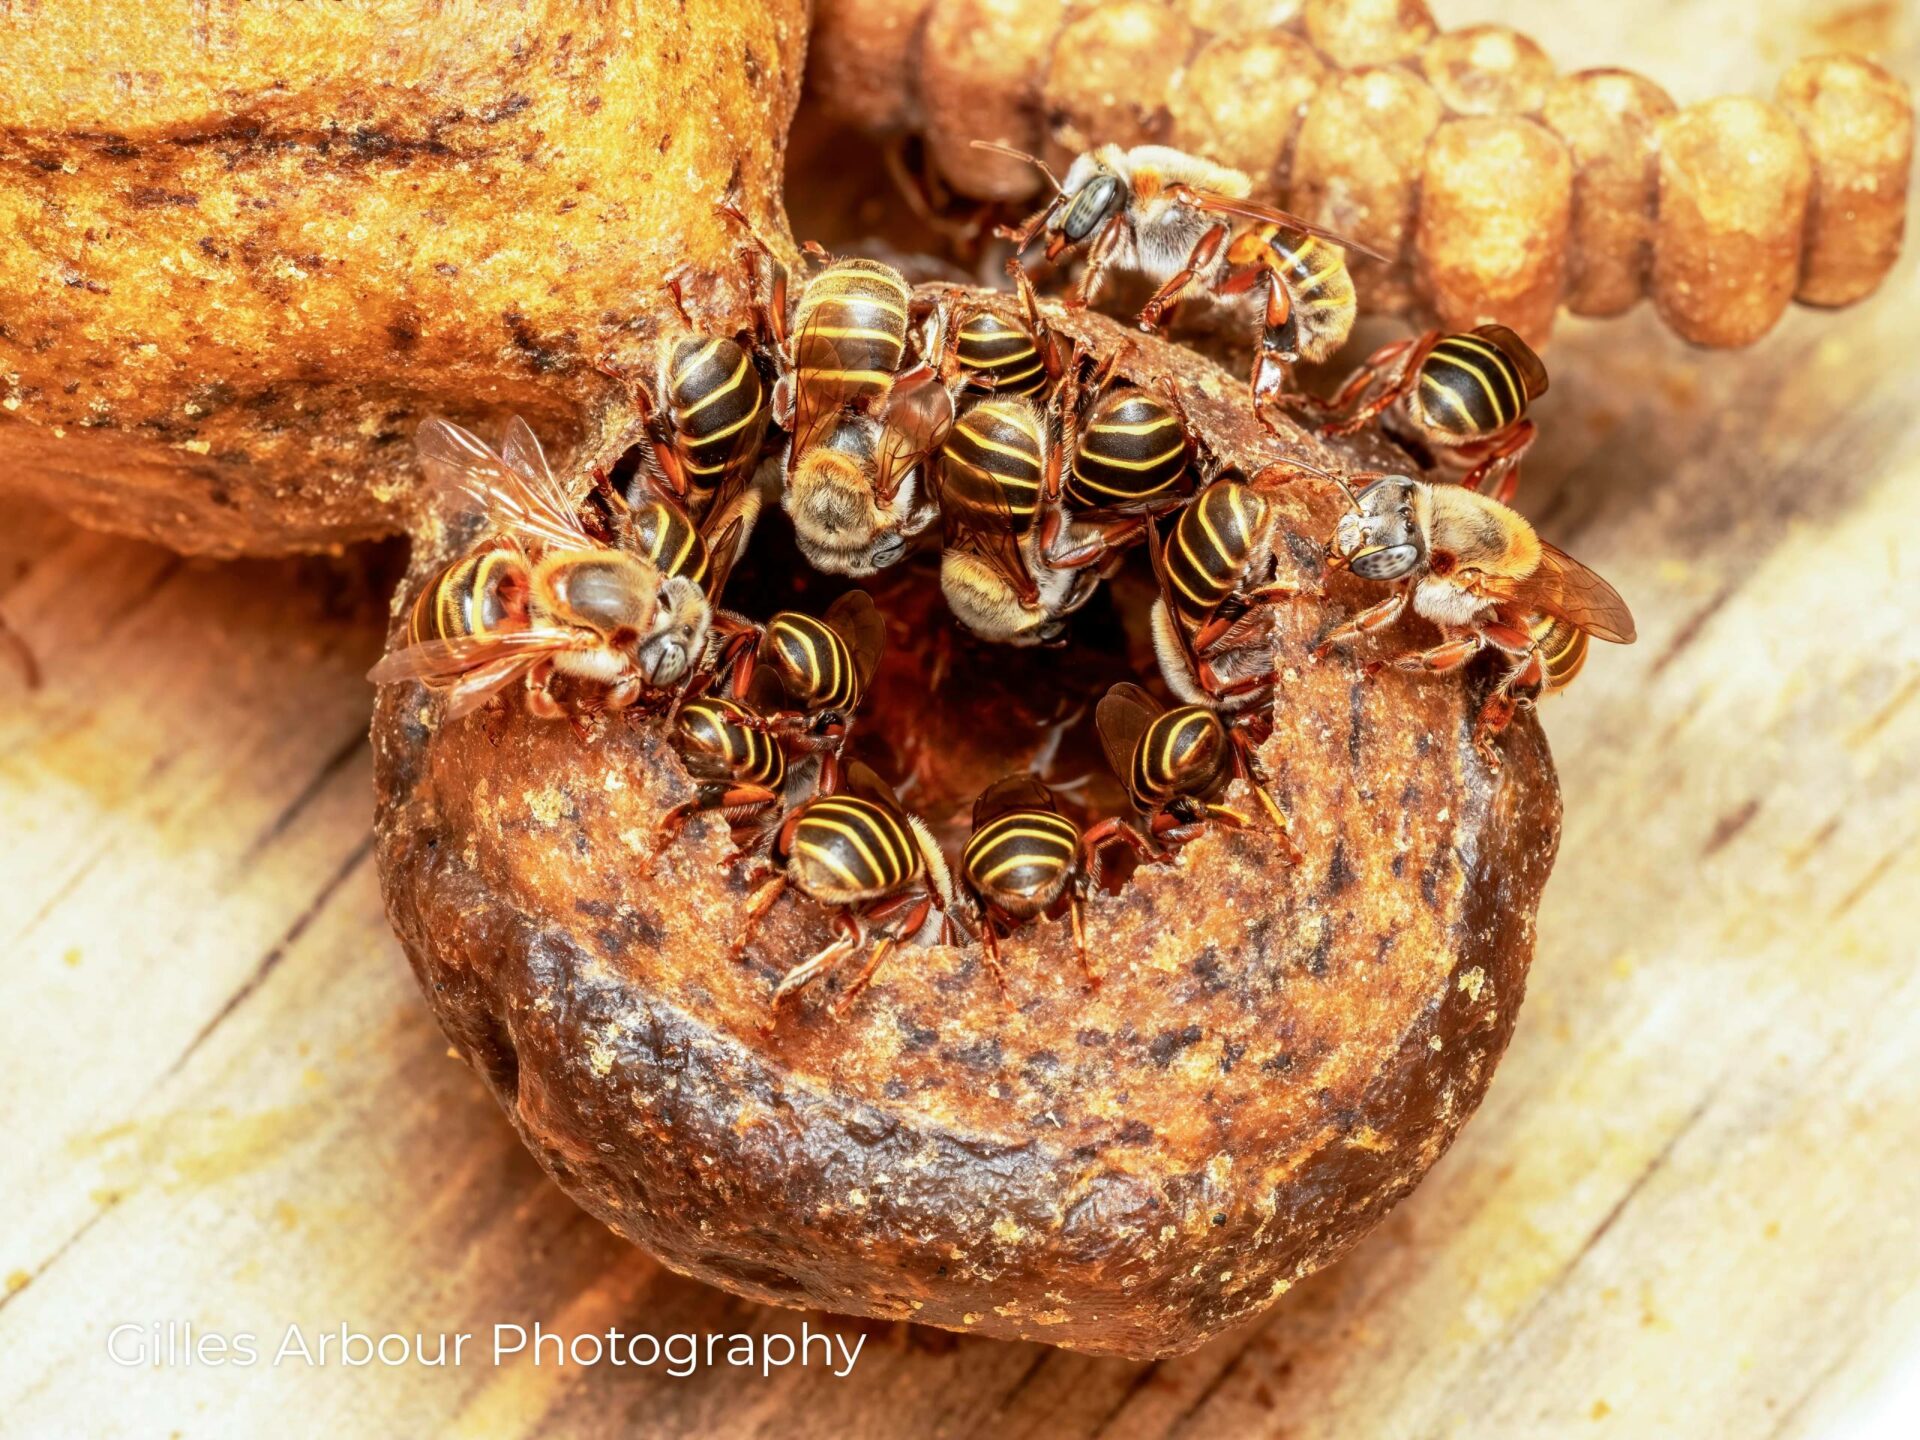 Bees Gather, Hungry, at the Honey Pot